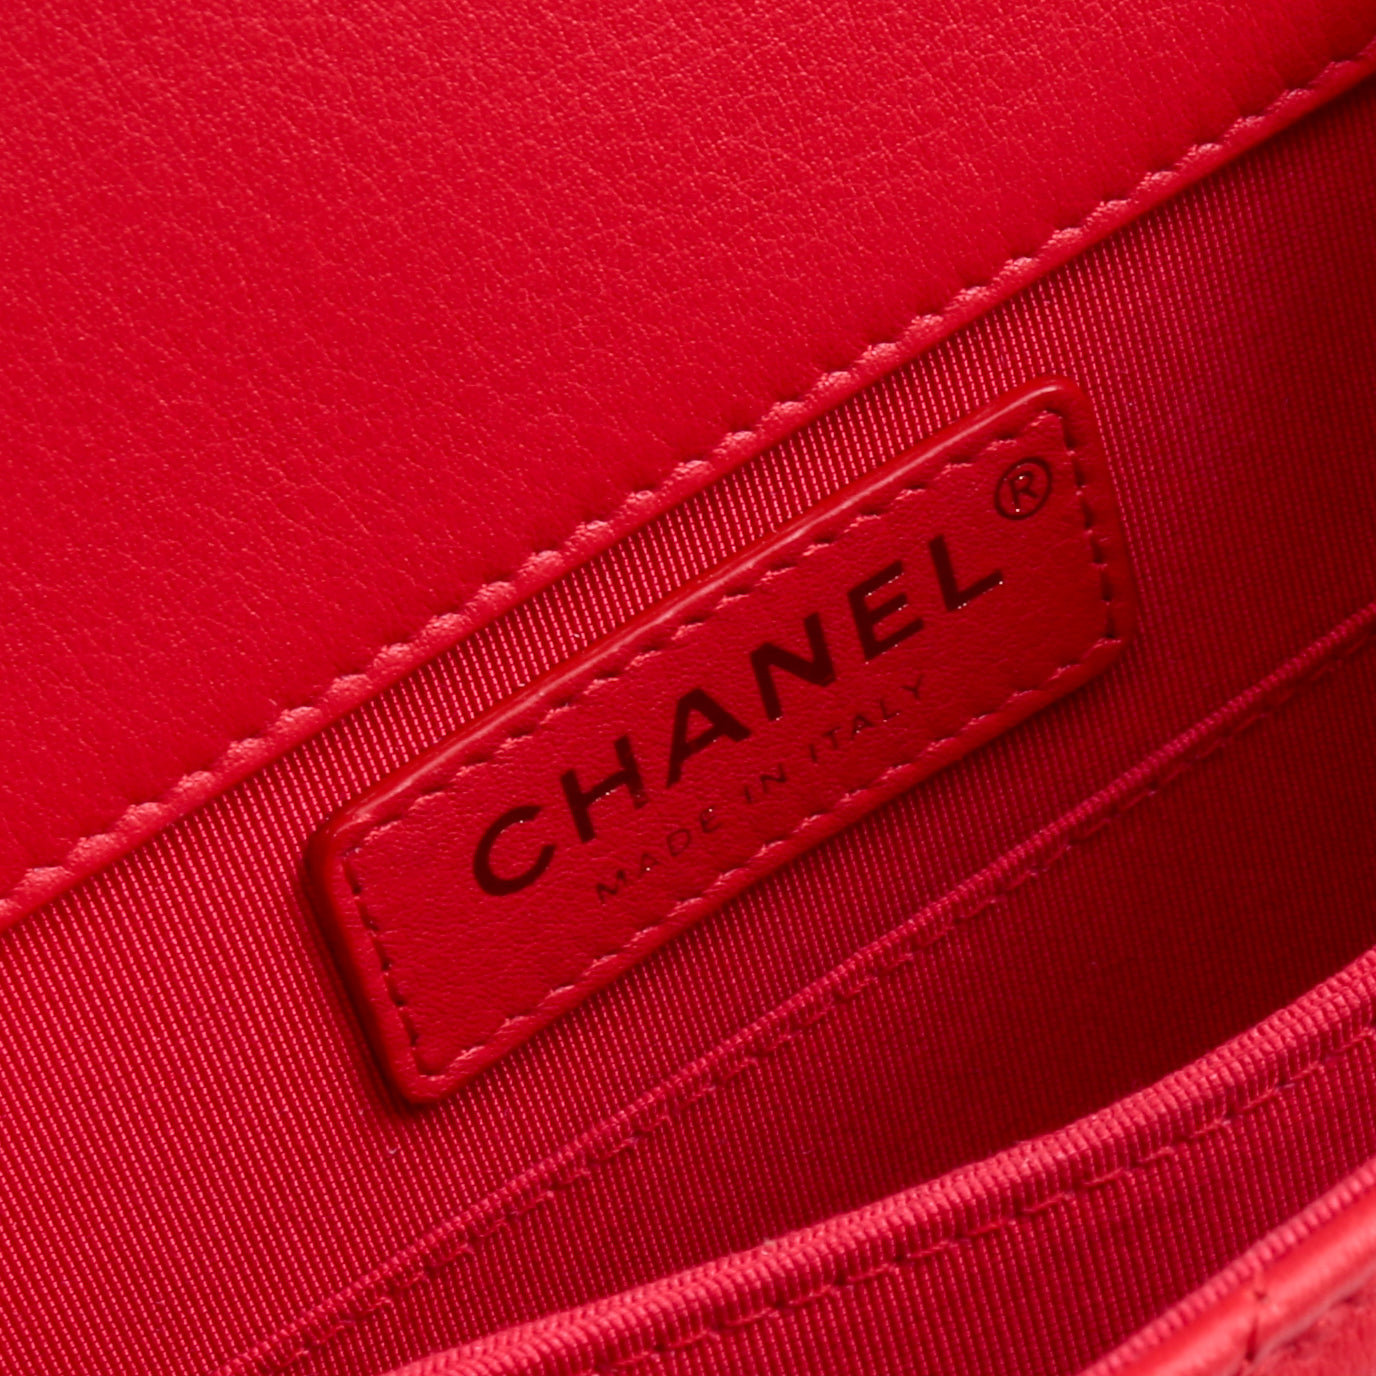 CHANEL North/South Boy Bag - Cherry Red